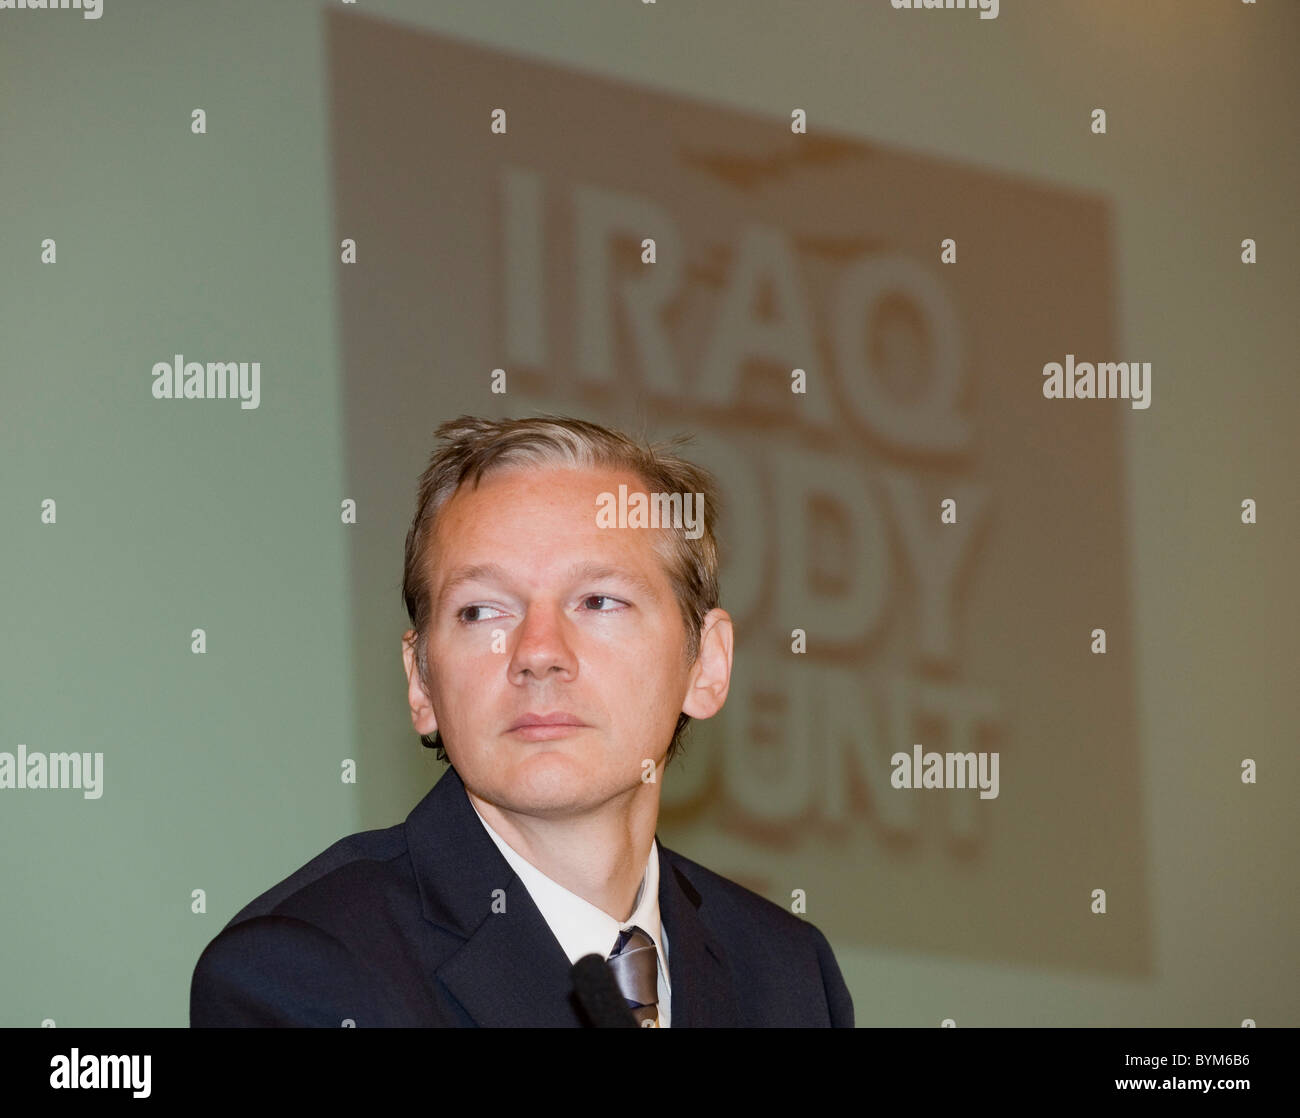 JULIAN ASSANGE, FOUNDER OF WIKILEAKS, EXPLAINING RELEASE OF IRAQ WARLOG AT A PRESS CONFERENCE IN WESTMINSTER. OCTOBER 2010. Stock Photo